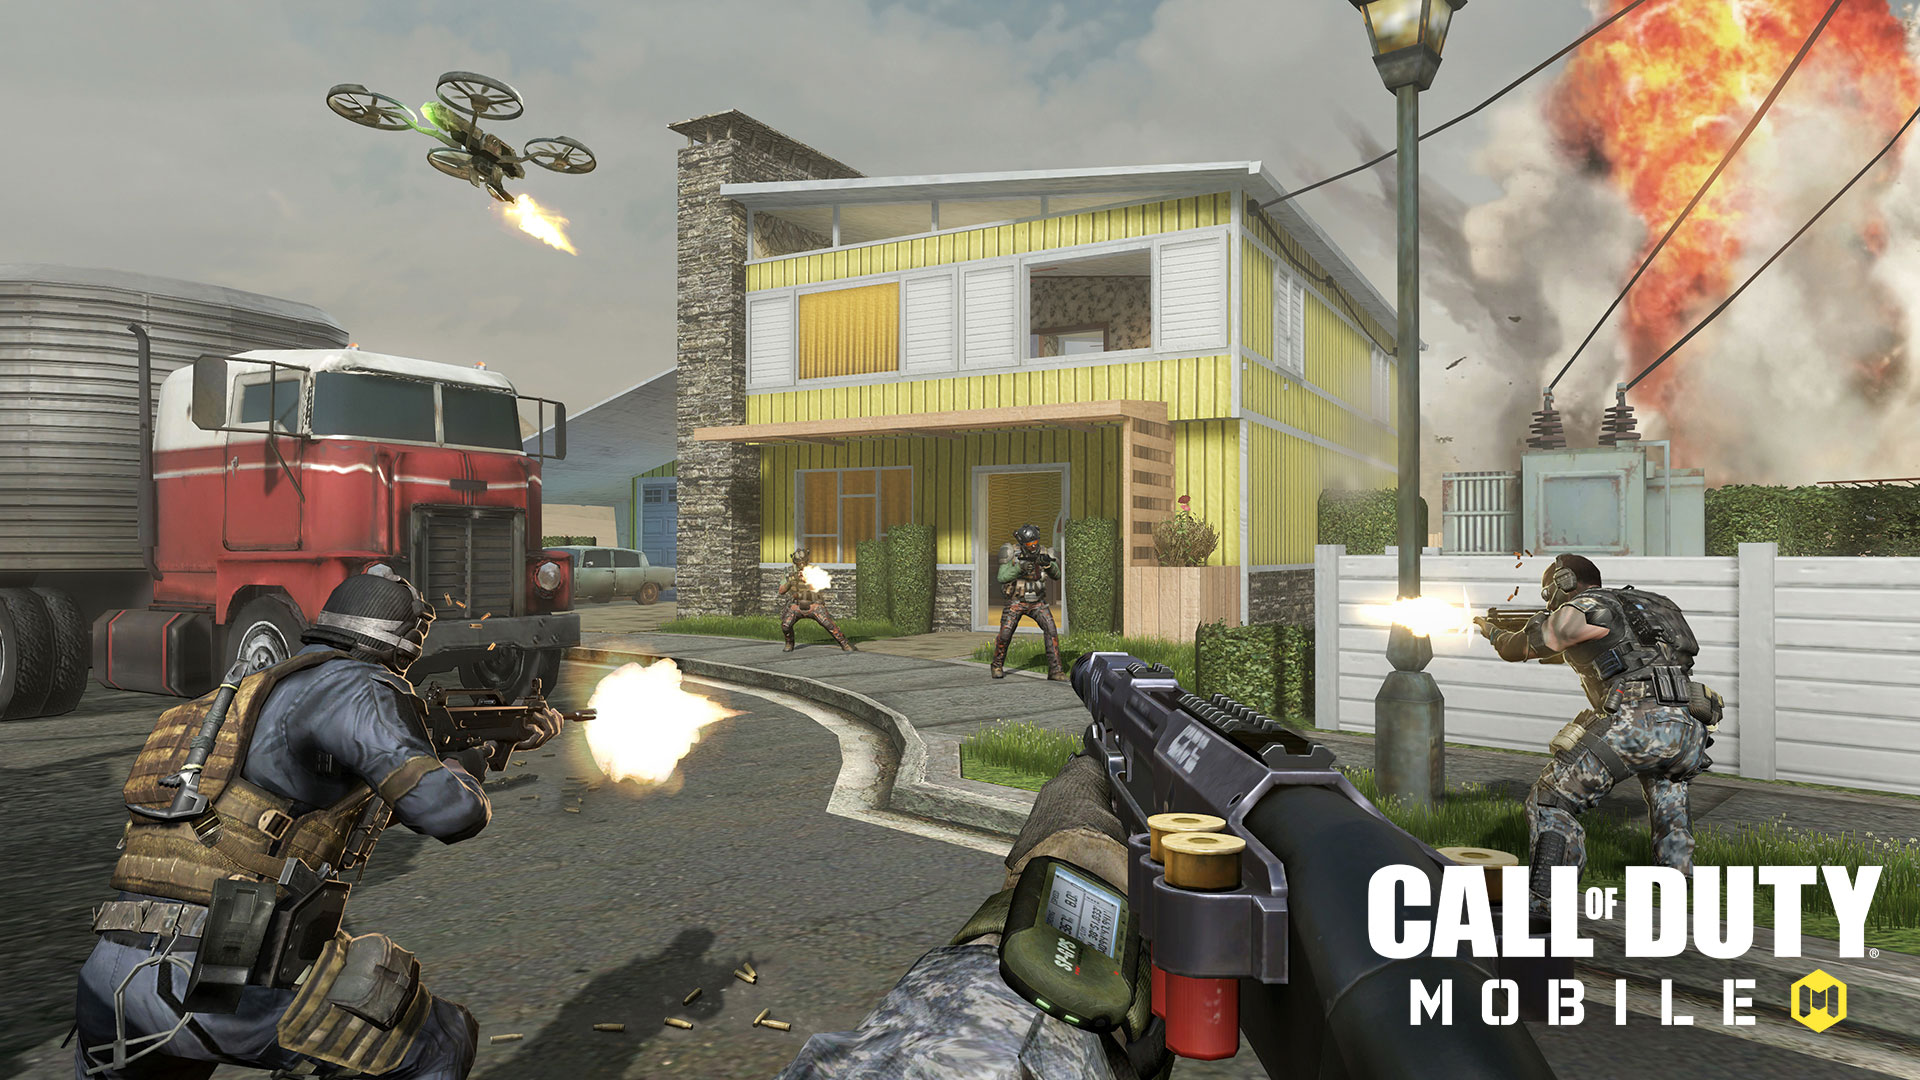 Call of Duty: Mobile” - December 20th Community Update - Call of